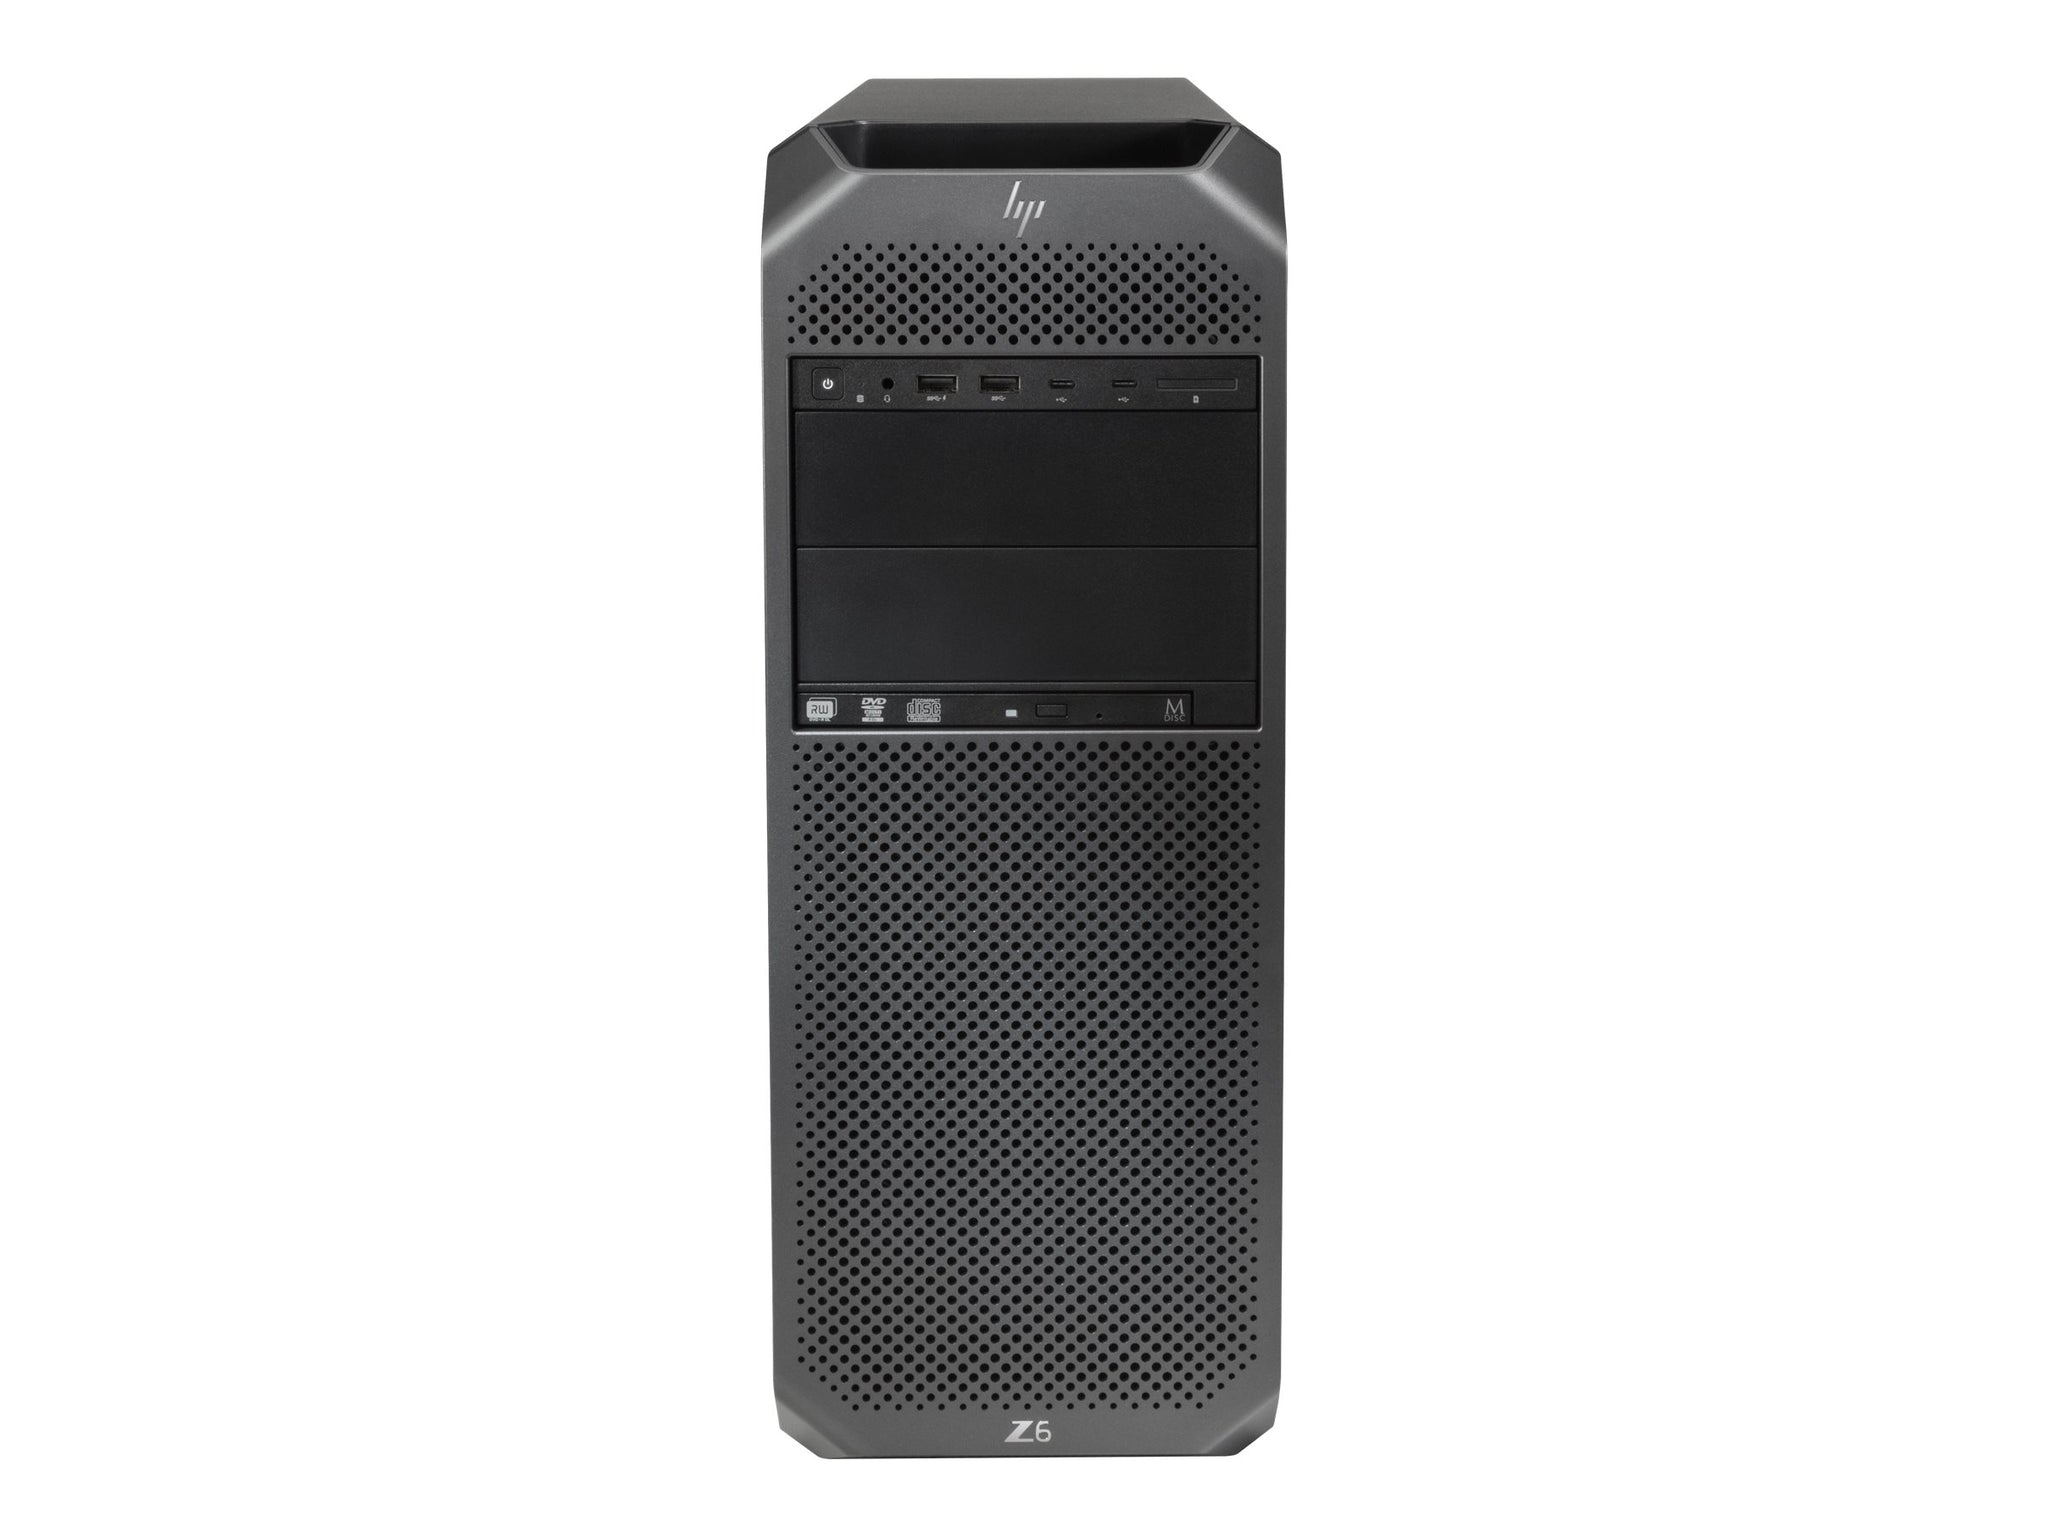 HP Z6 G4 Ex lease Workstation Tower 2X Intel Xeon Silver 4112 CPU with 48GB RAM 512 GB NVME SSD + 1TB SSD with QUADRO P1000 Graphics Card DVD Windows 10 Pro